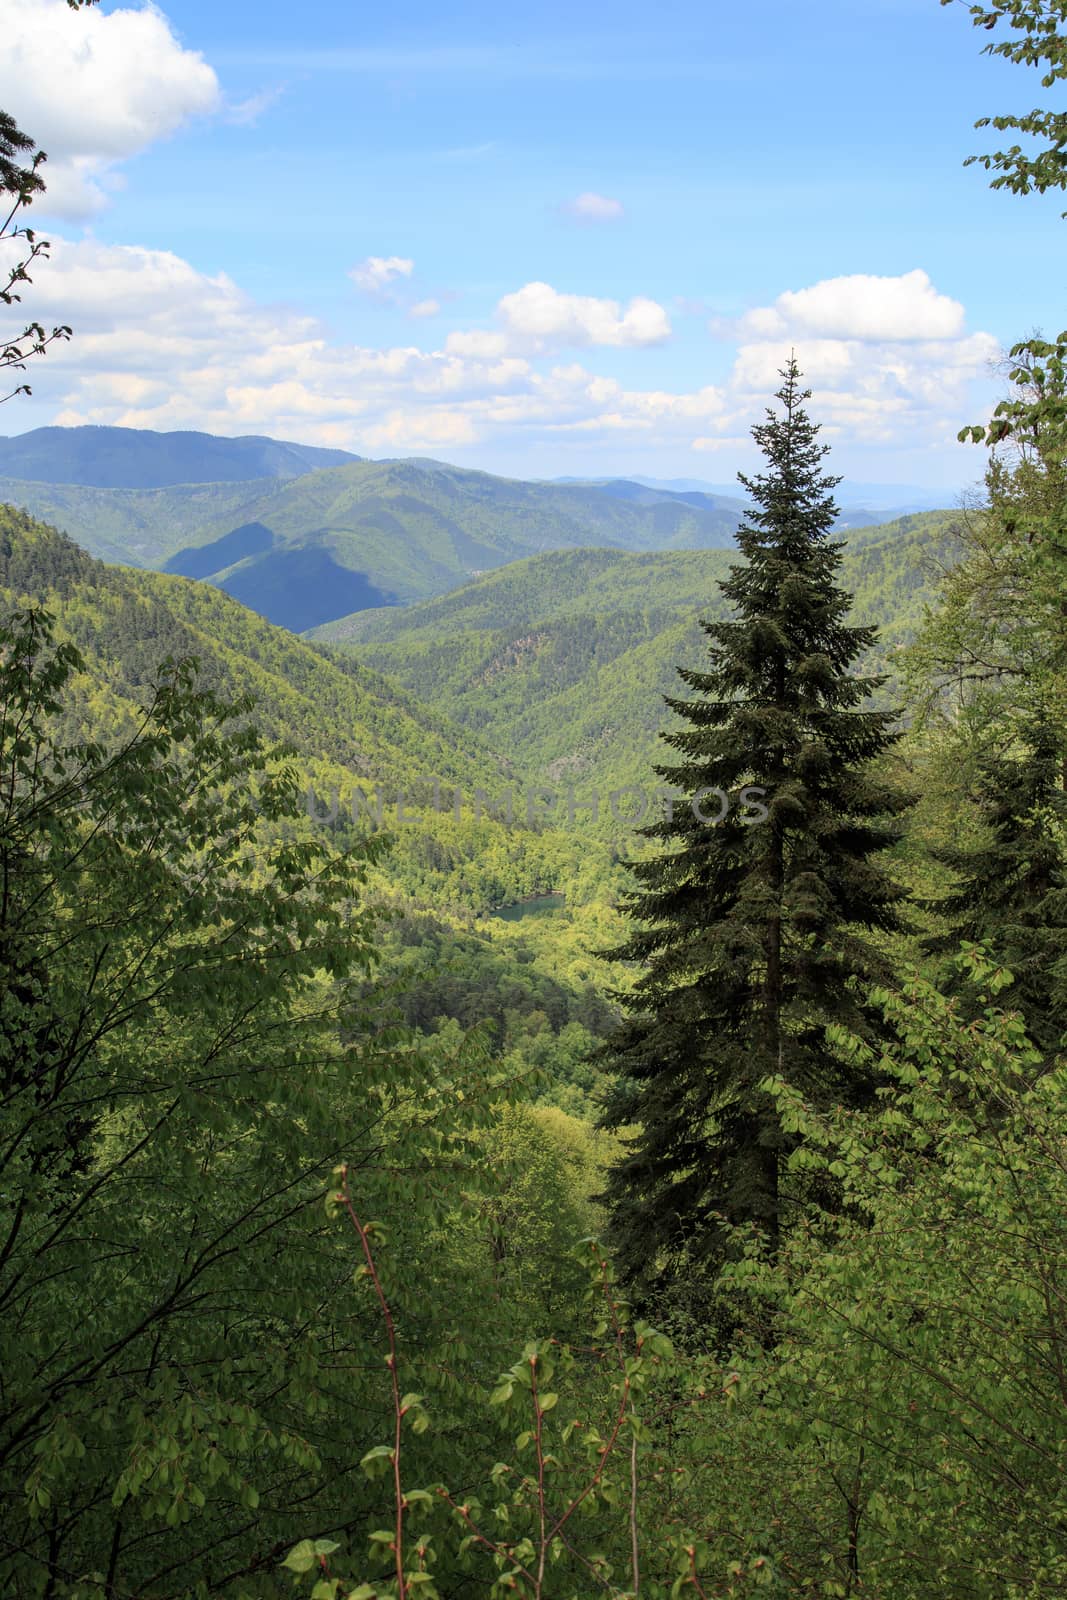 View of big pine trees in forest in Yedigoller National Park surrounded with mountains, on blue cloudy sky background.